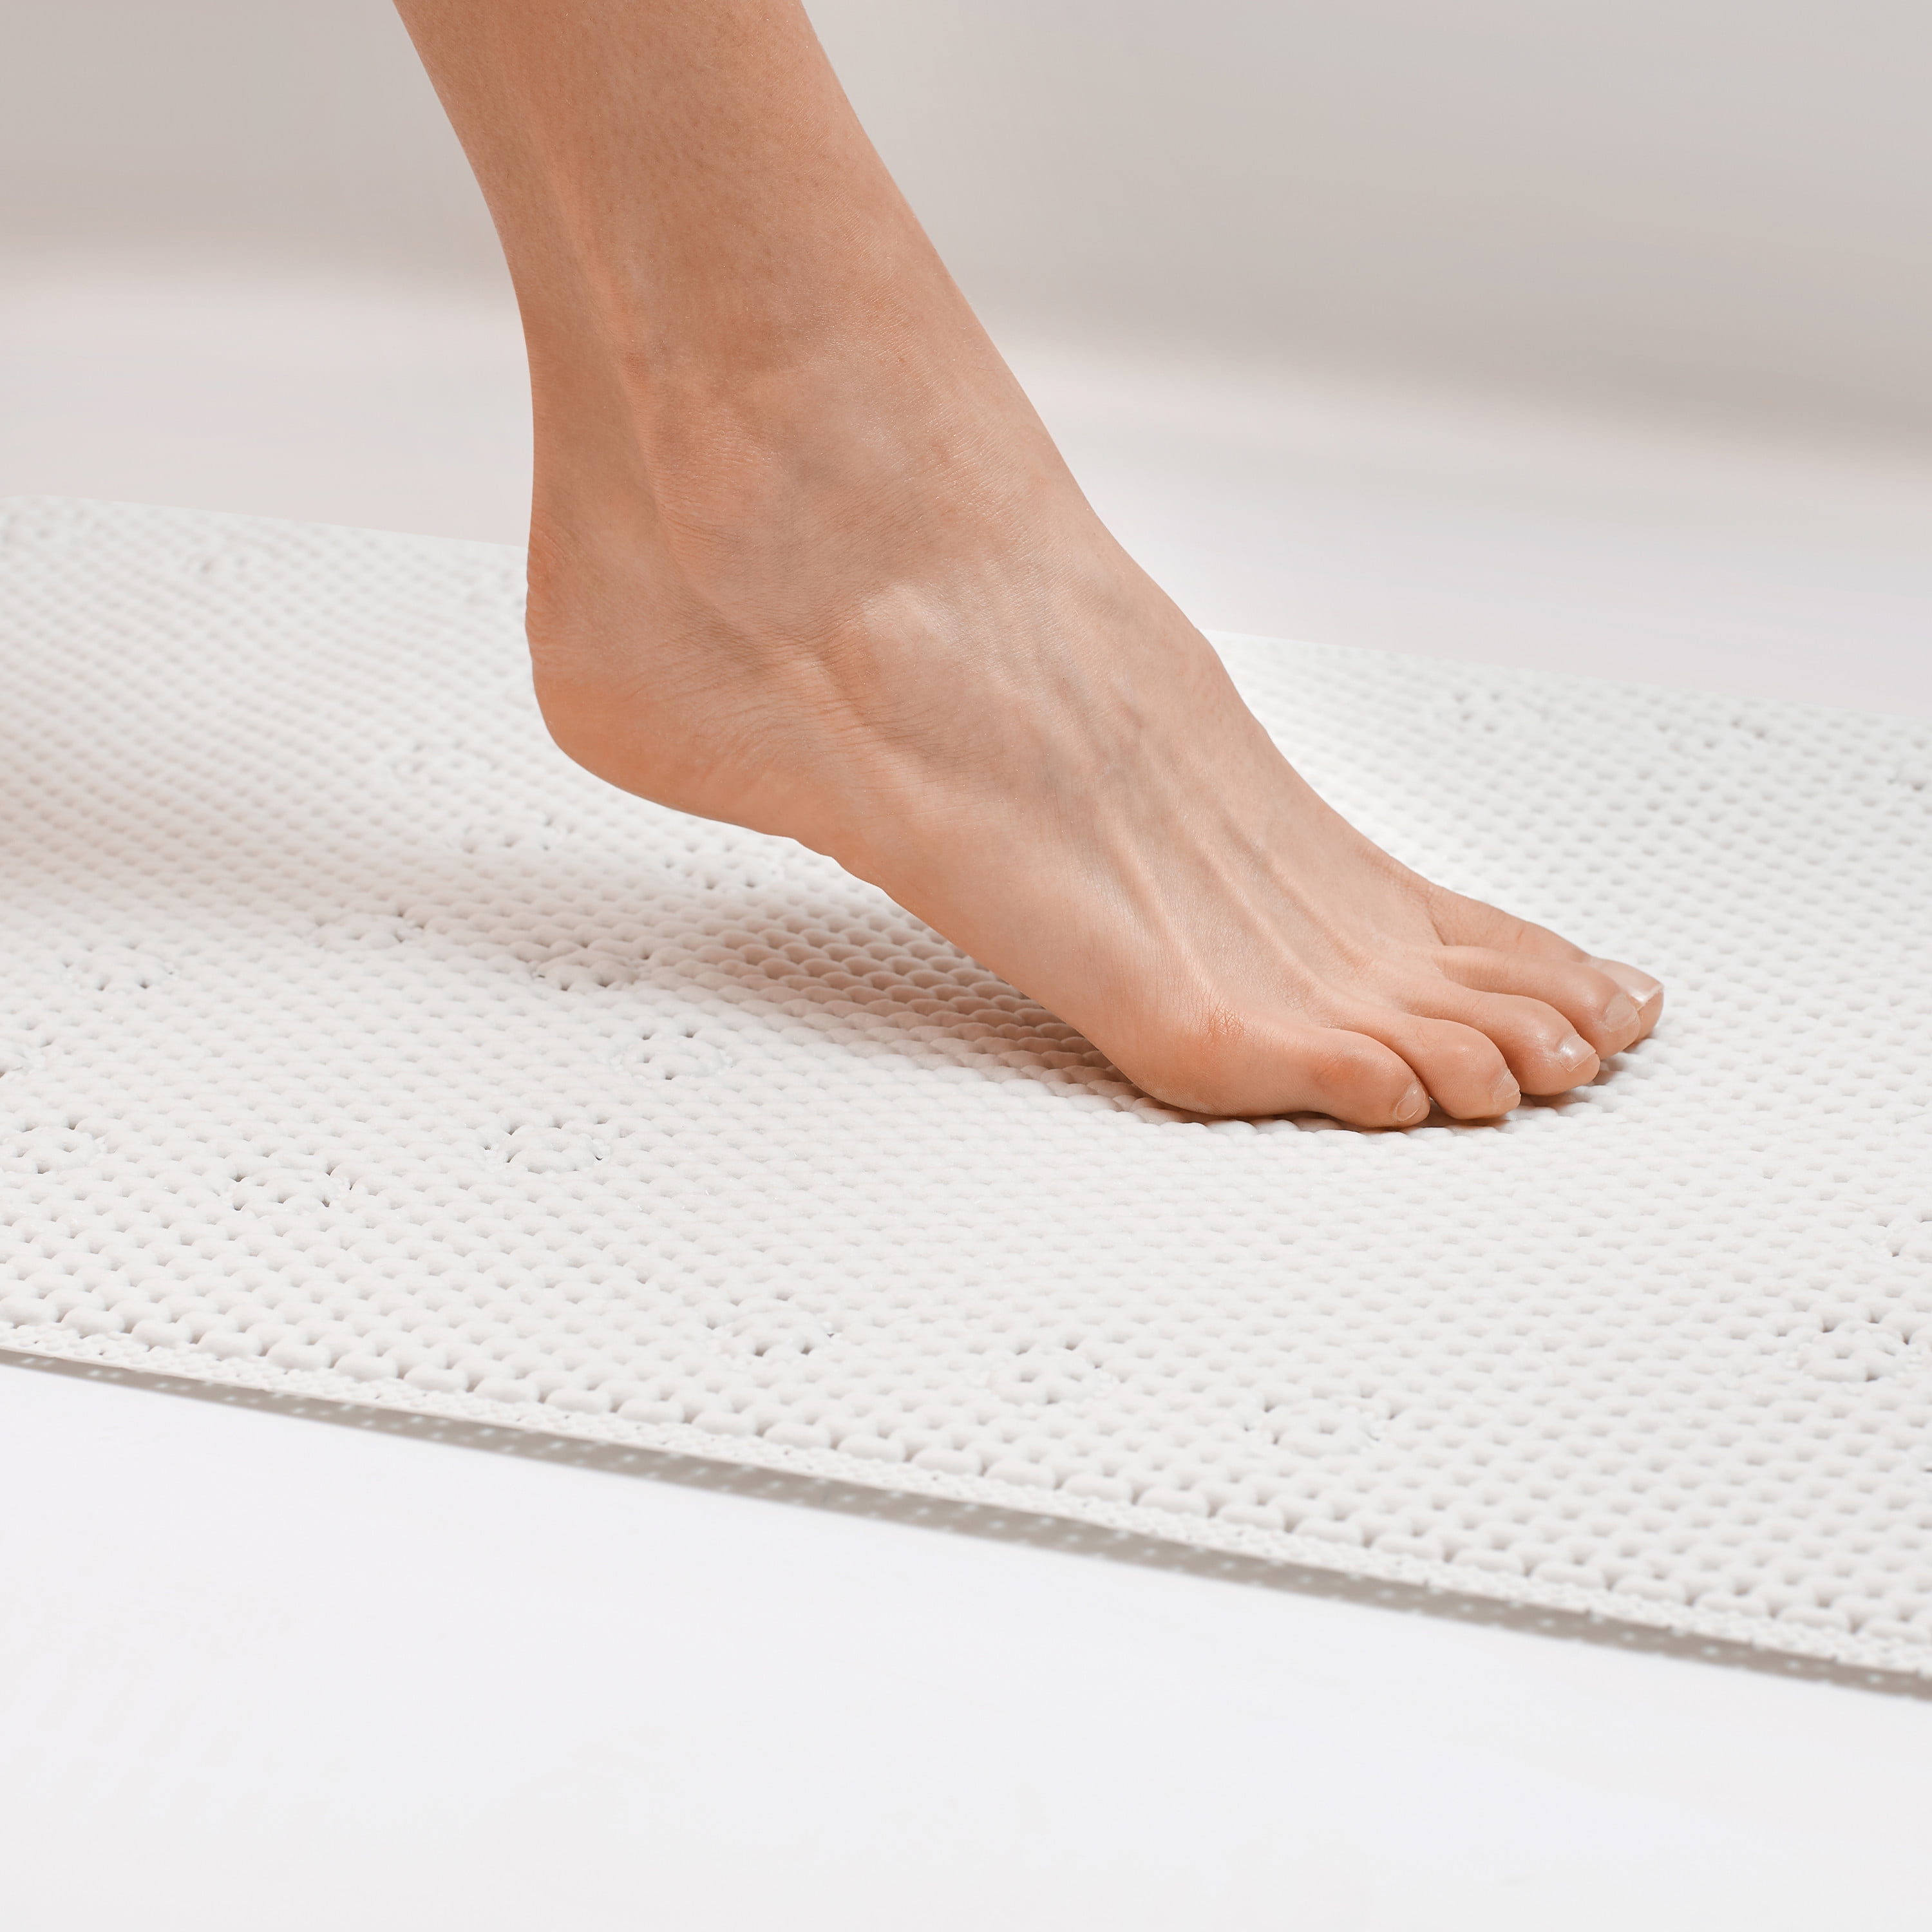 Thickened Bath Mat, Foot Wiping Mat, 23.6 x 15.7 x 1.2 inches